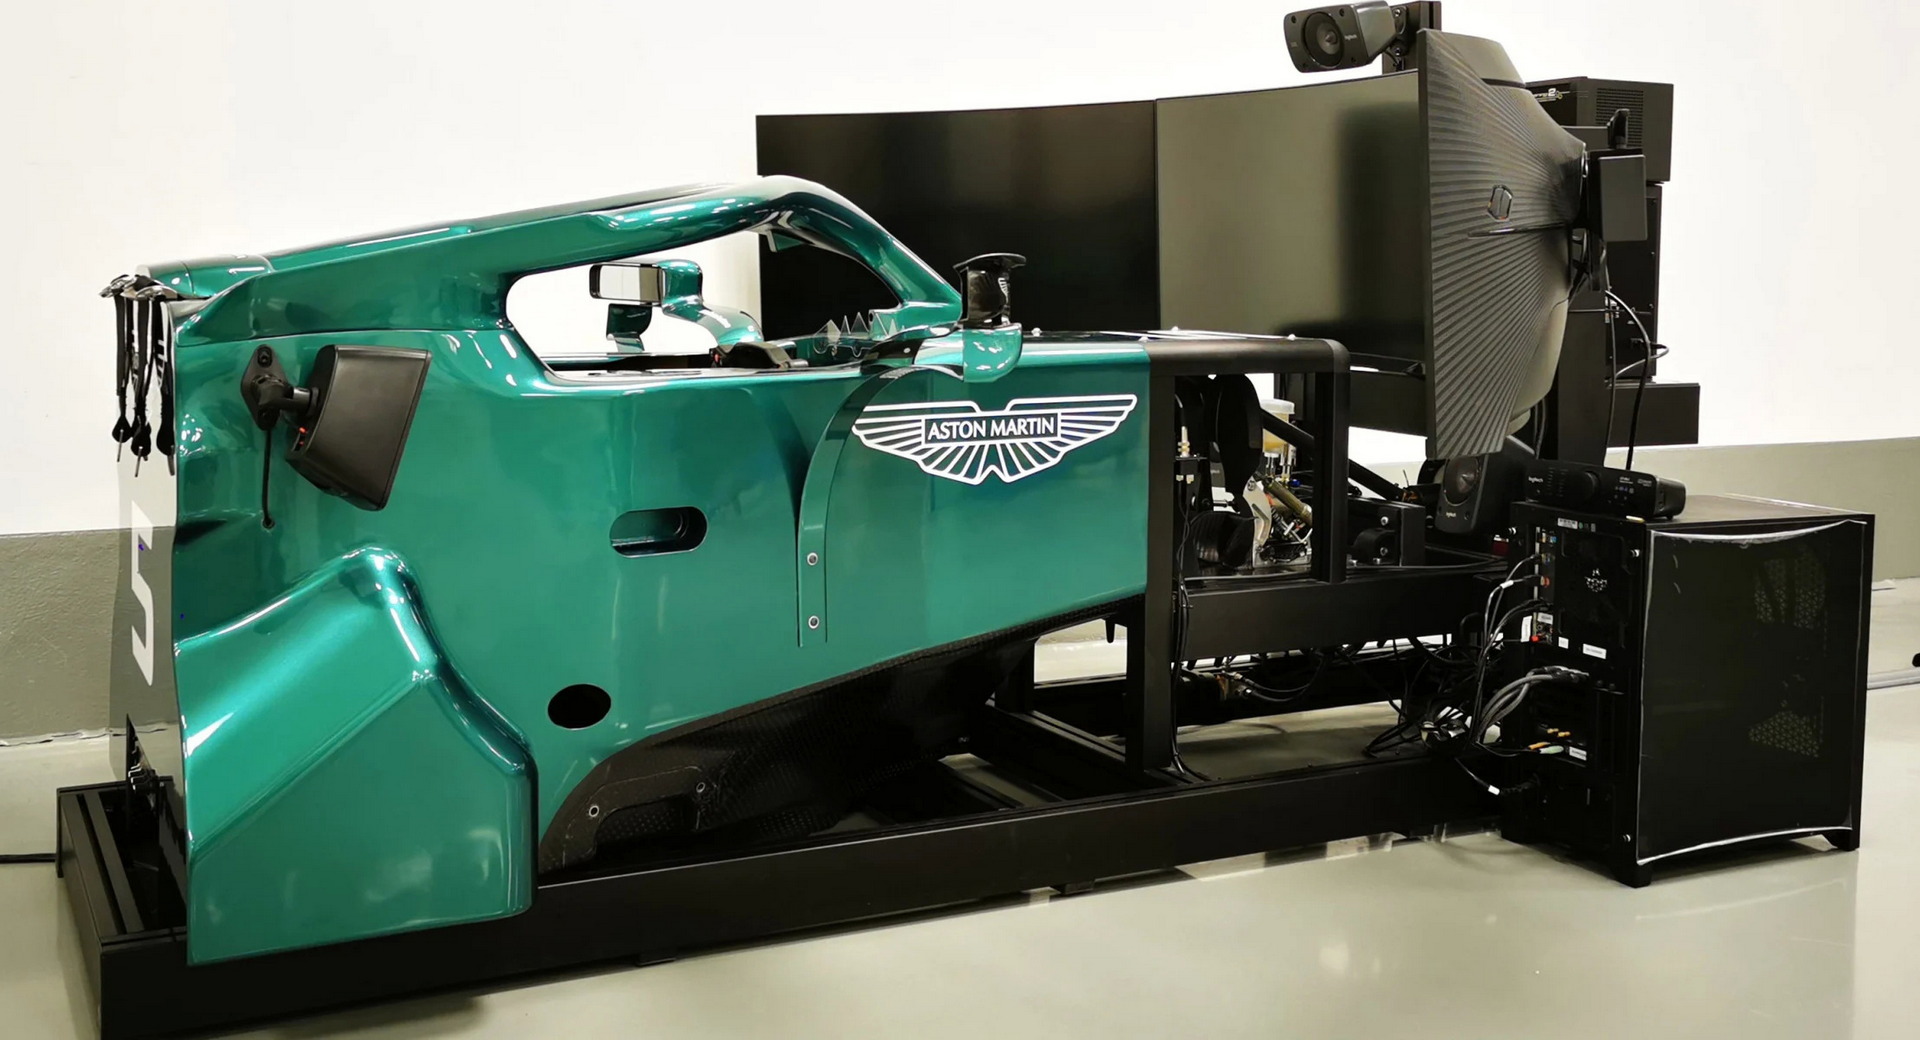 Sebastian Vettel's New Home Racing Sim Rig Is Made From An Actual F1 Car